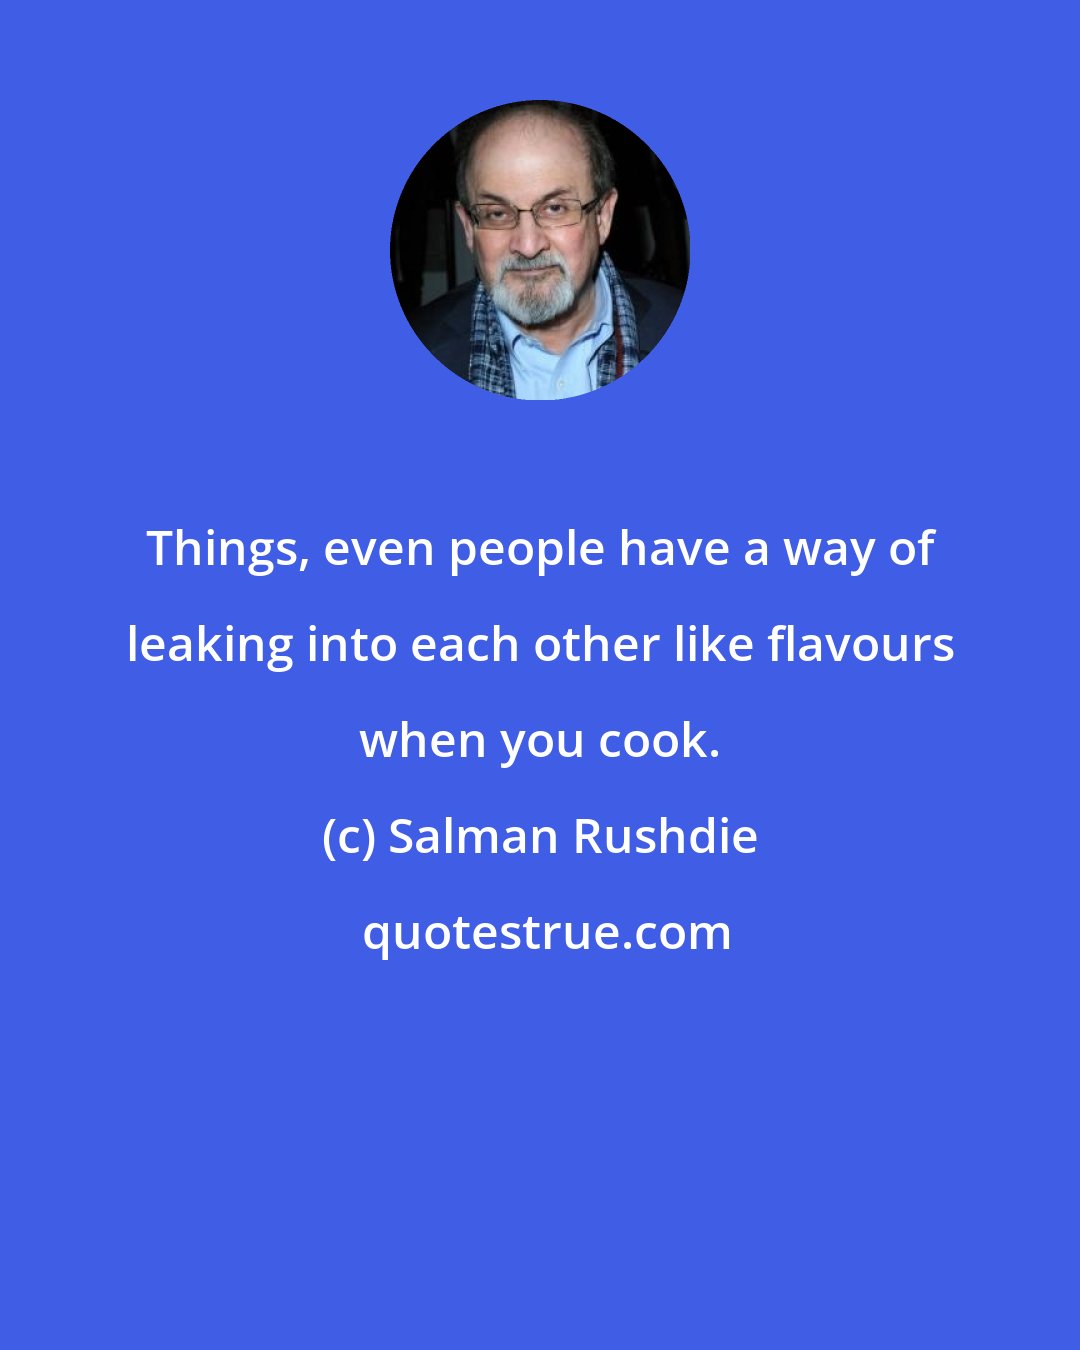 Salman Rushdie: Things, even people have a way of leaking into each other like flavours when you cook.